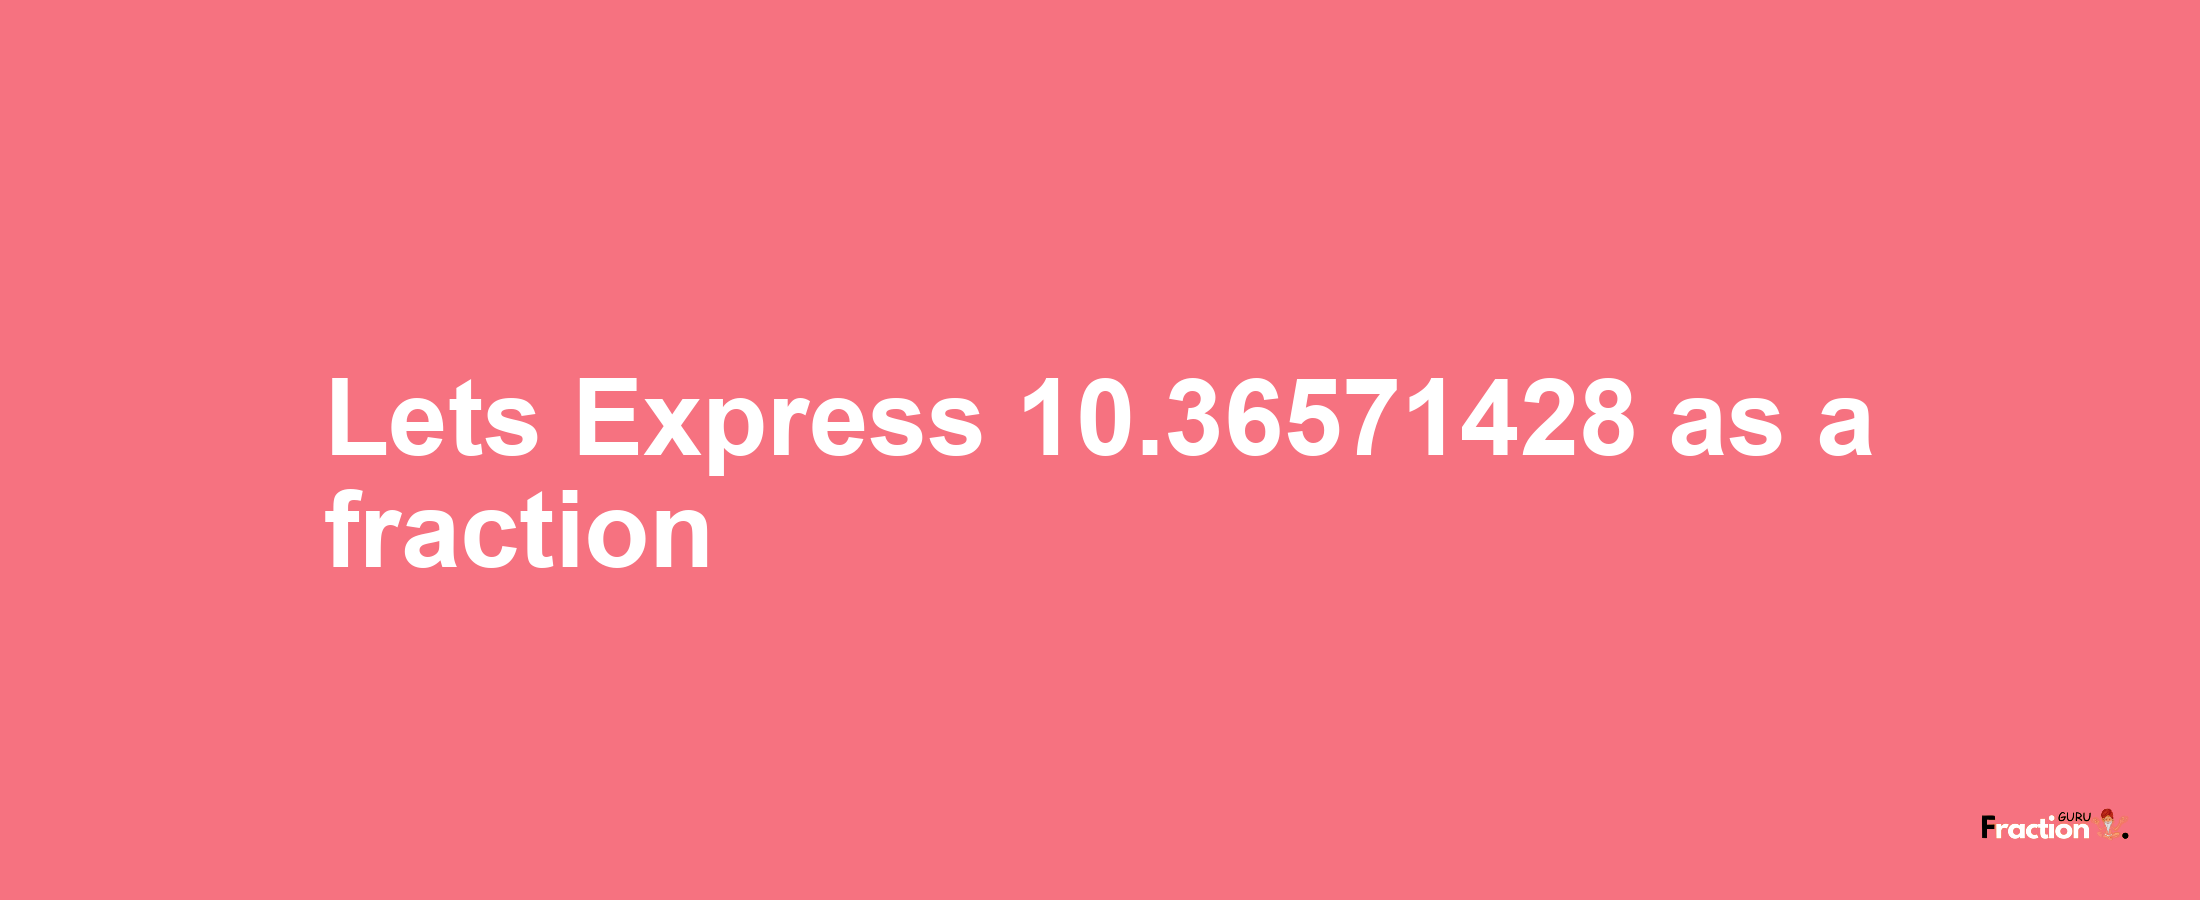 Lets Express 10.36571428 as afraction